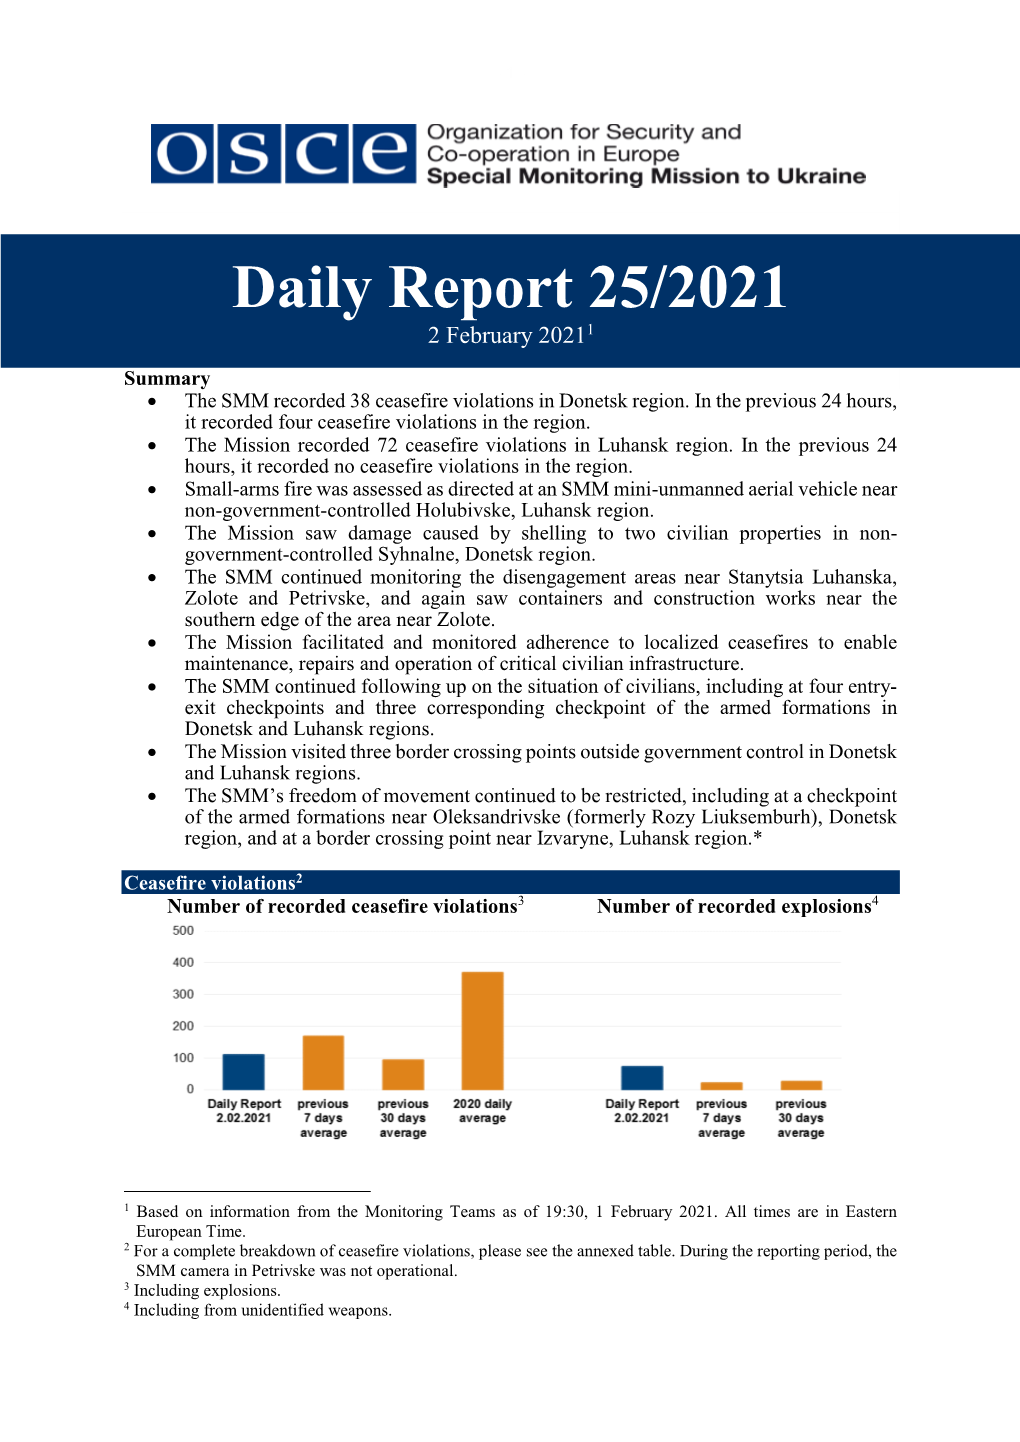 Daily Report 25/2021 2 February 20211